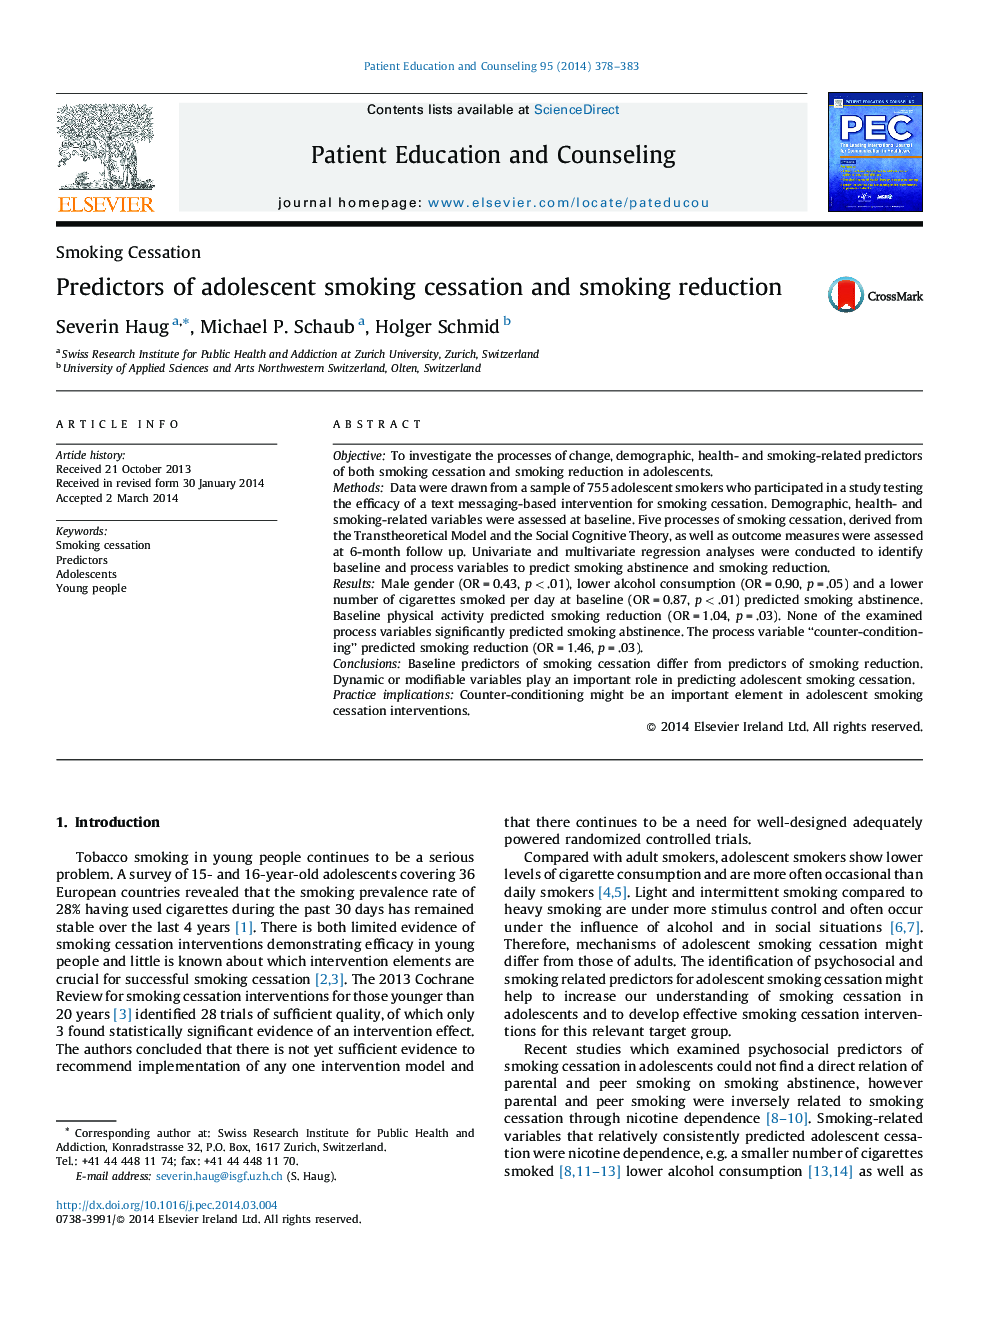 Predictors of adolescent smoking cessation and smoking reduction